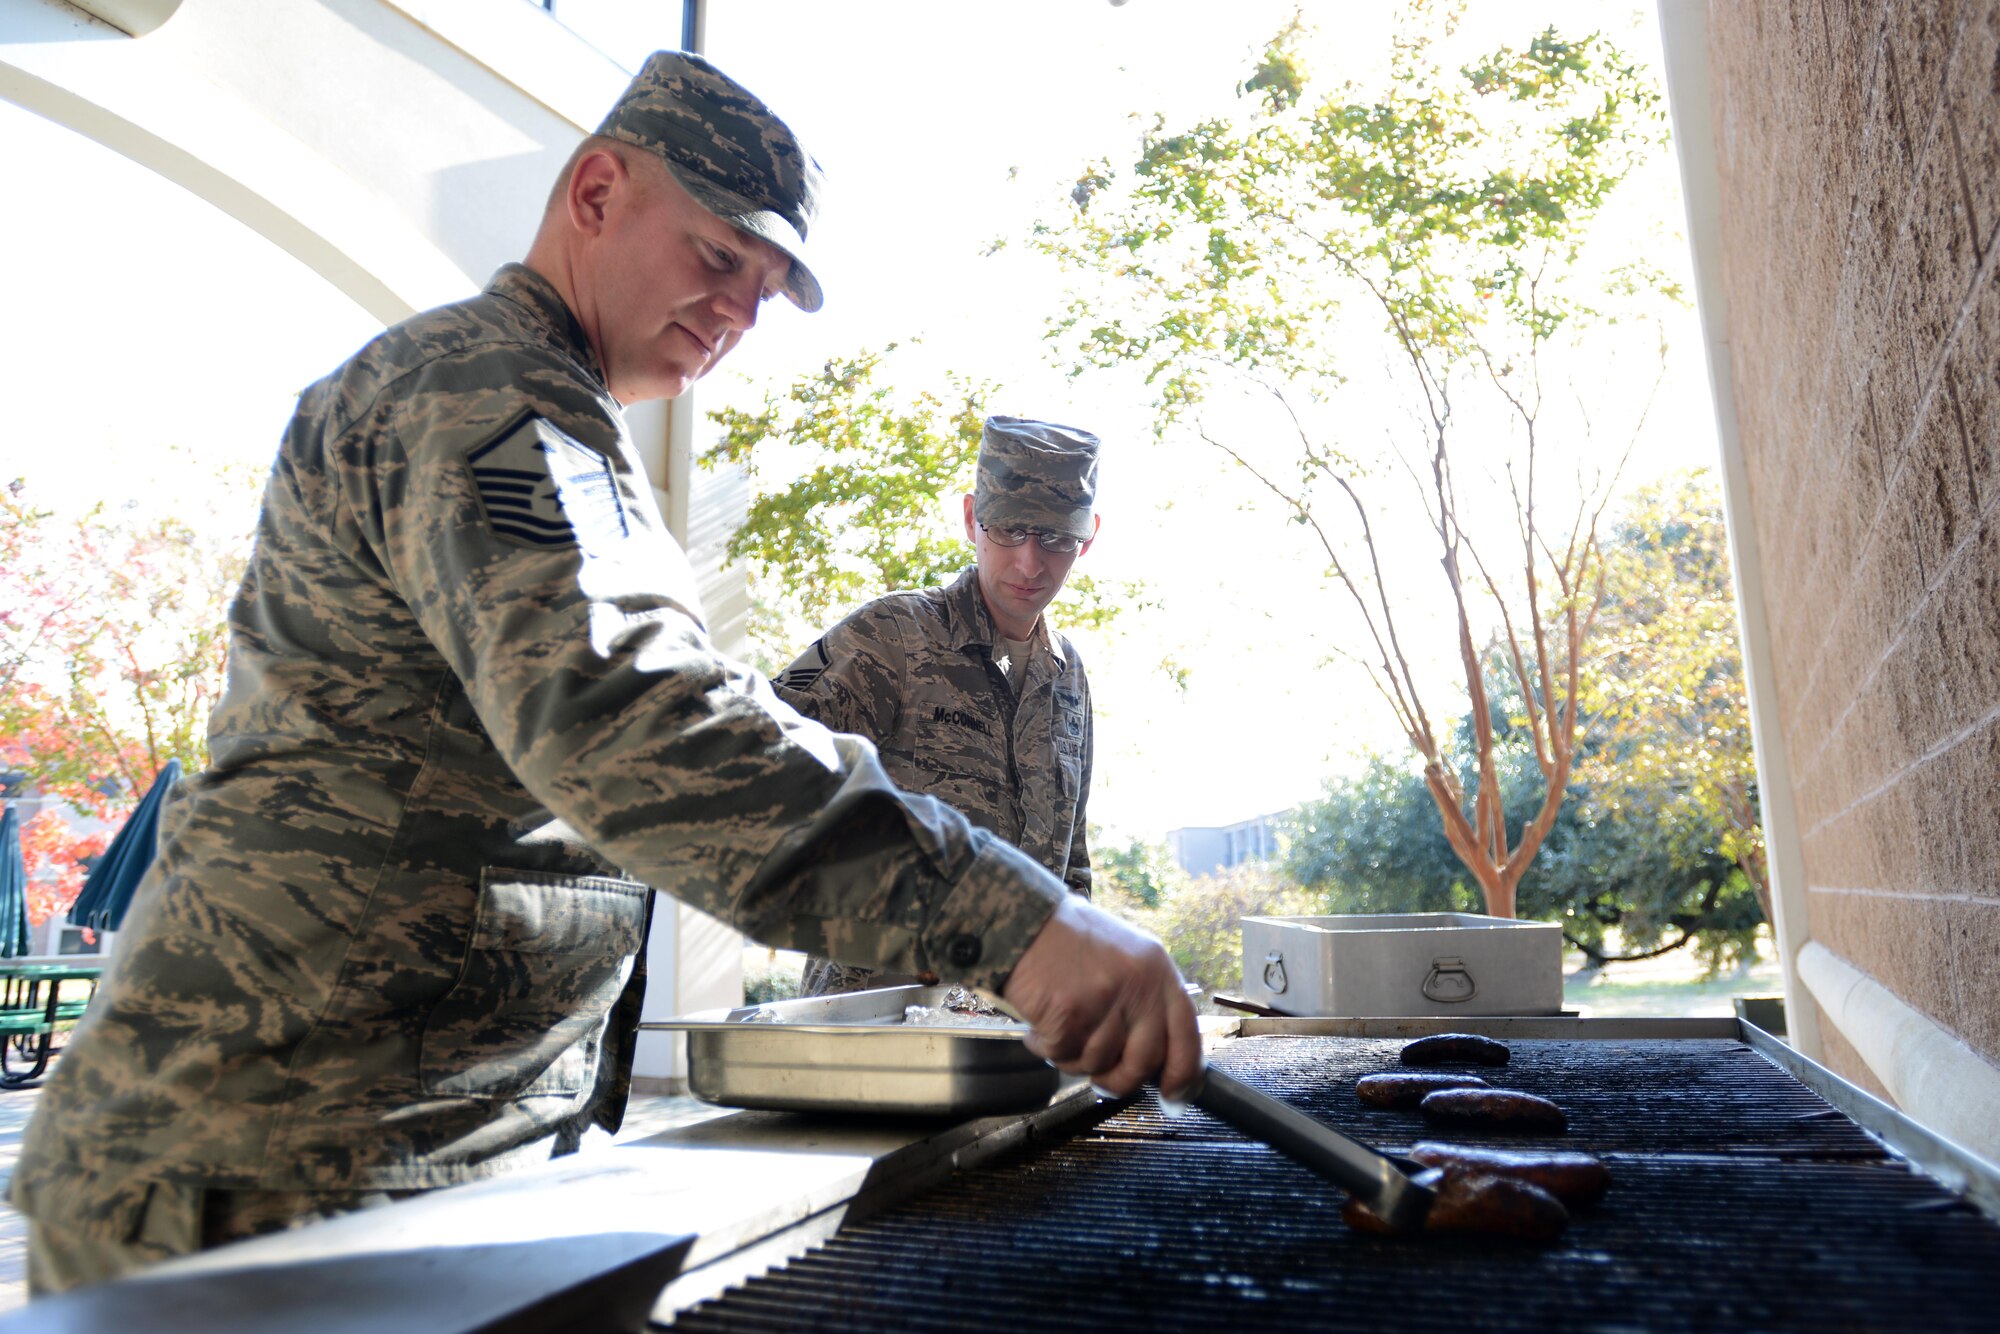 U.S. Air Force Master Sgt. Jonathan Curl, 20th Medical Group first sergeant, and Master Sgt. Jason McConnell, 20th Operations Support Squadron intelligence superintendent, cook bratwursts on a grill at Shaw Air Force Base, S.C., Nov. 16, 2016. The Shaw Diamond Council teamed up to bring food to all of the Airmen participating in operational readiness exercise Weasel Victory 17-03. (U.S. Air Force photo by Airman 1st Class Kelsey Tucker)